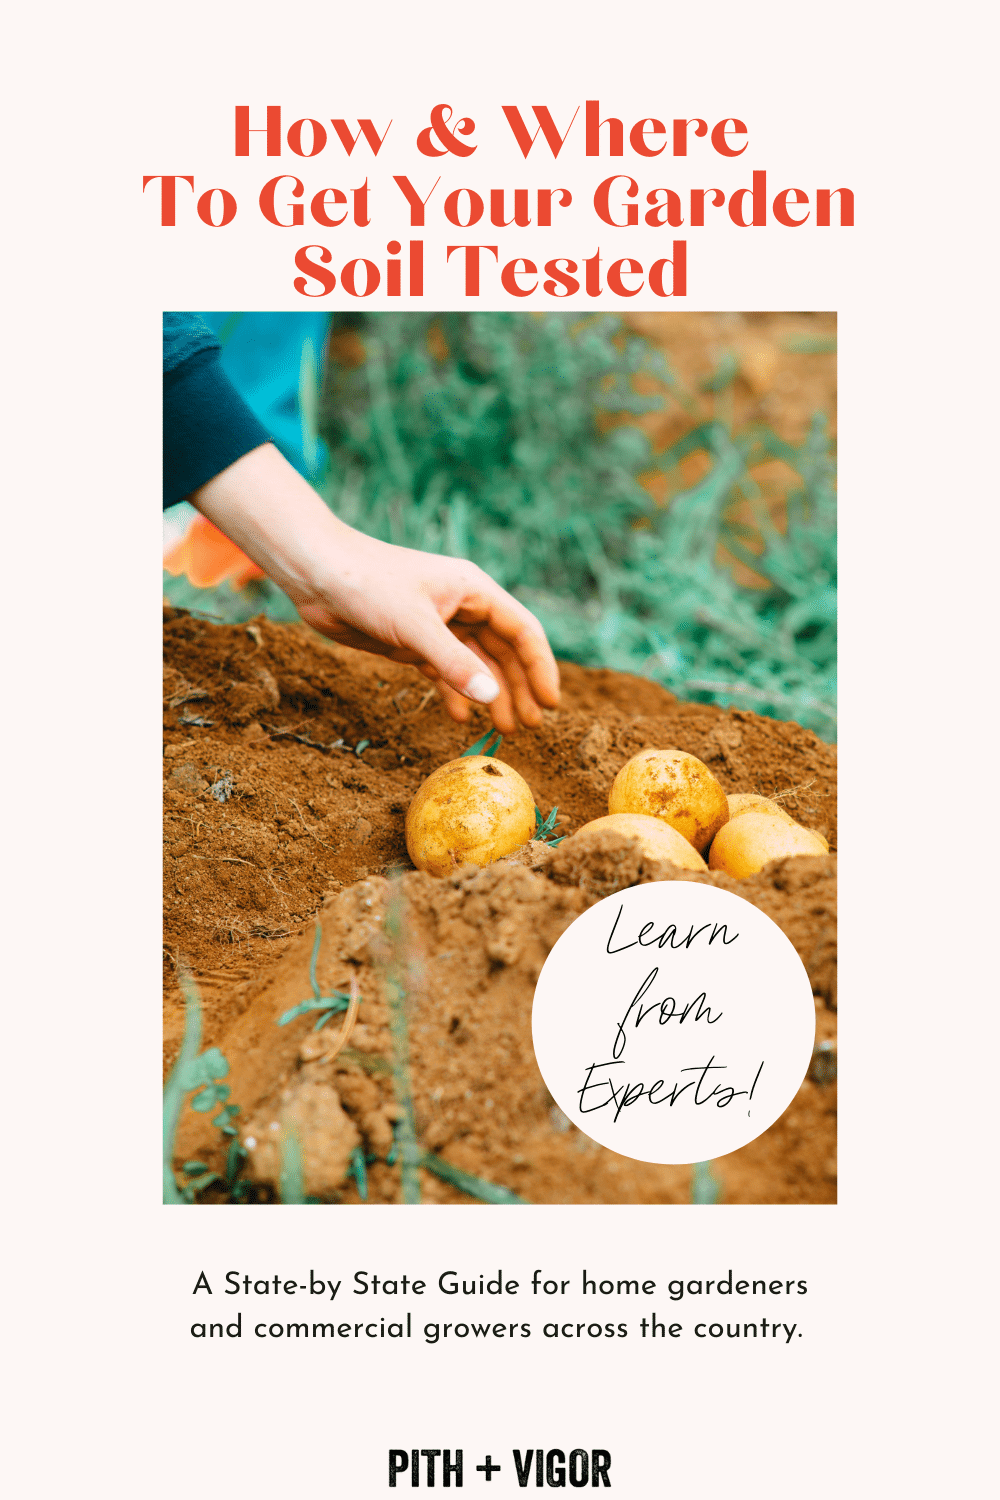 state-by state soil testing guide